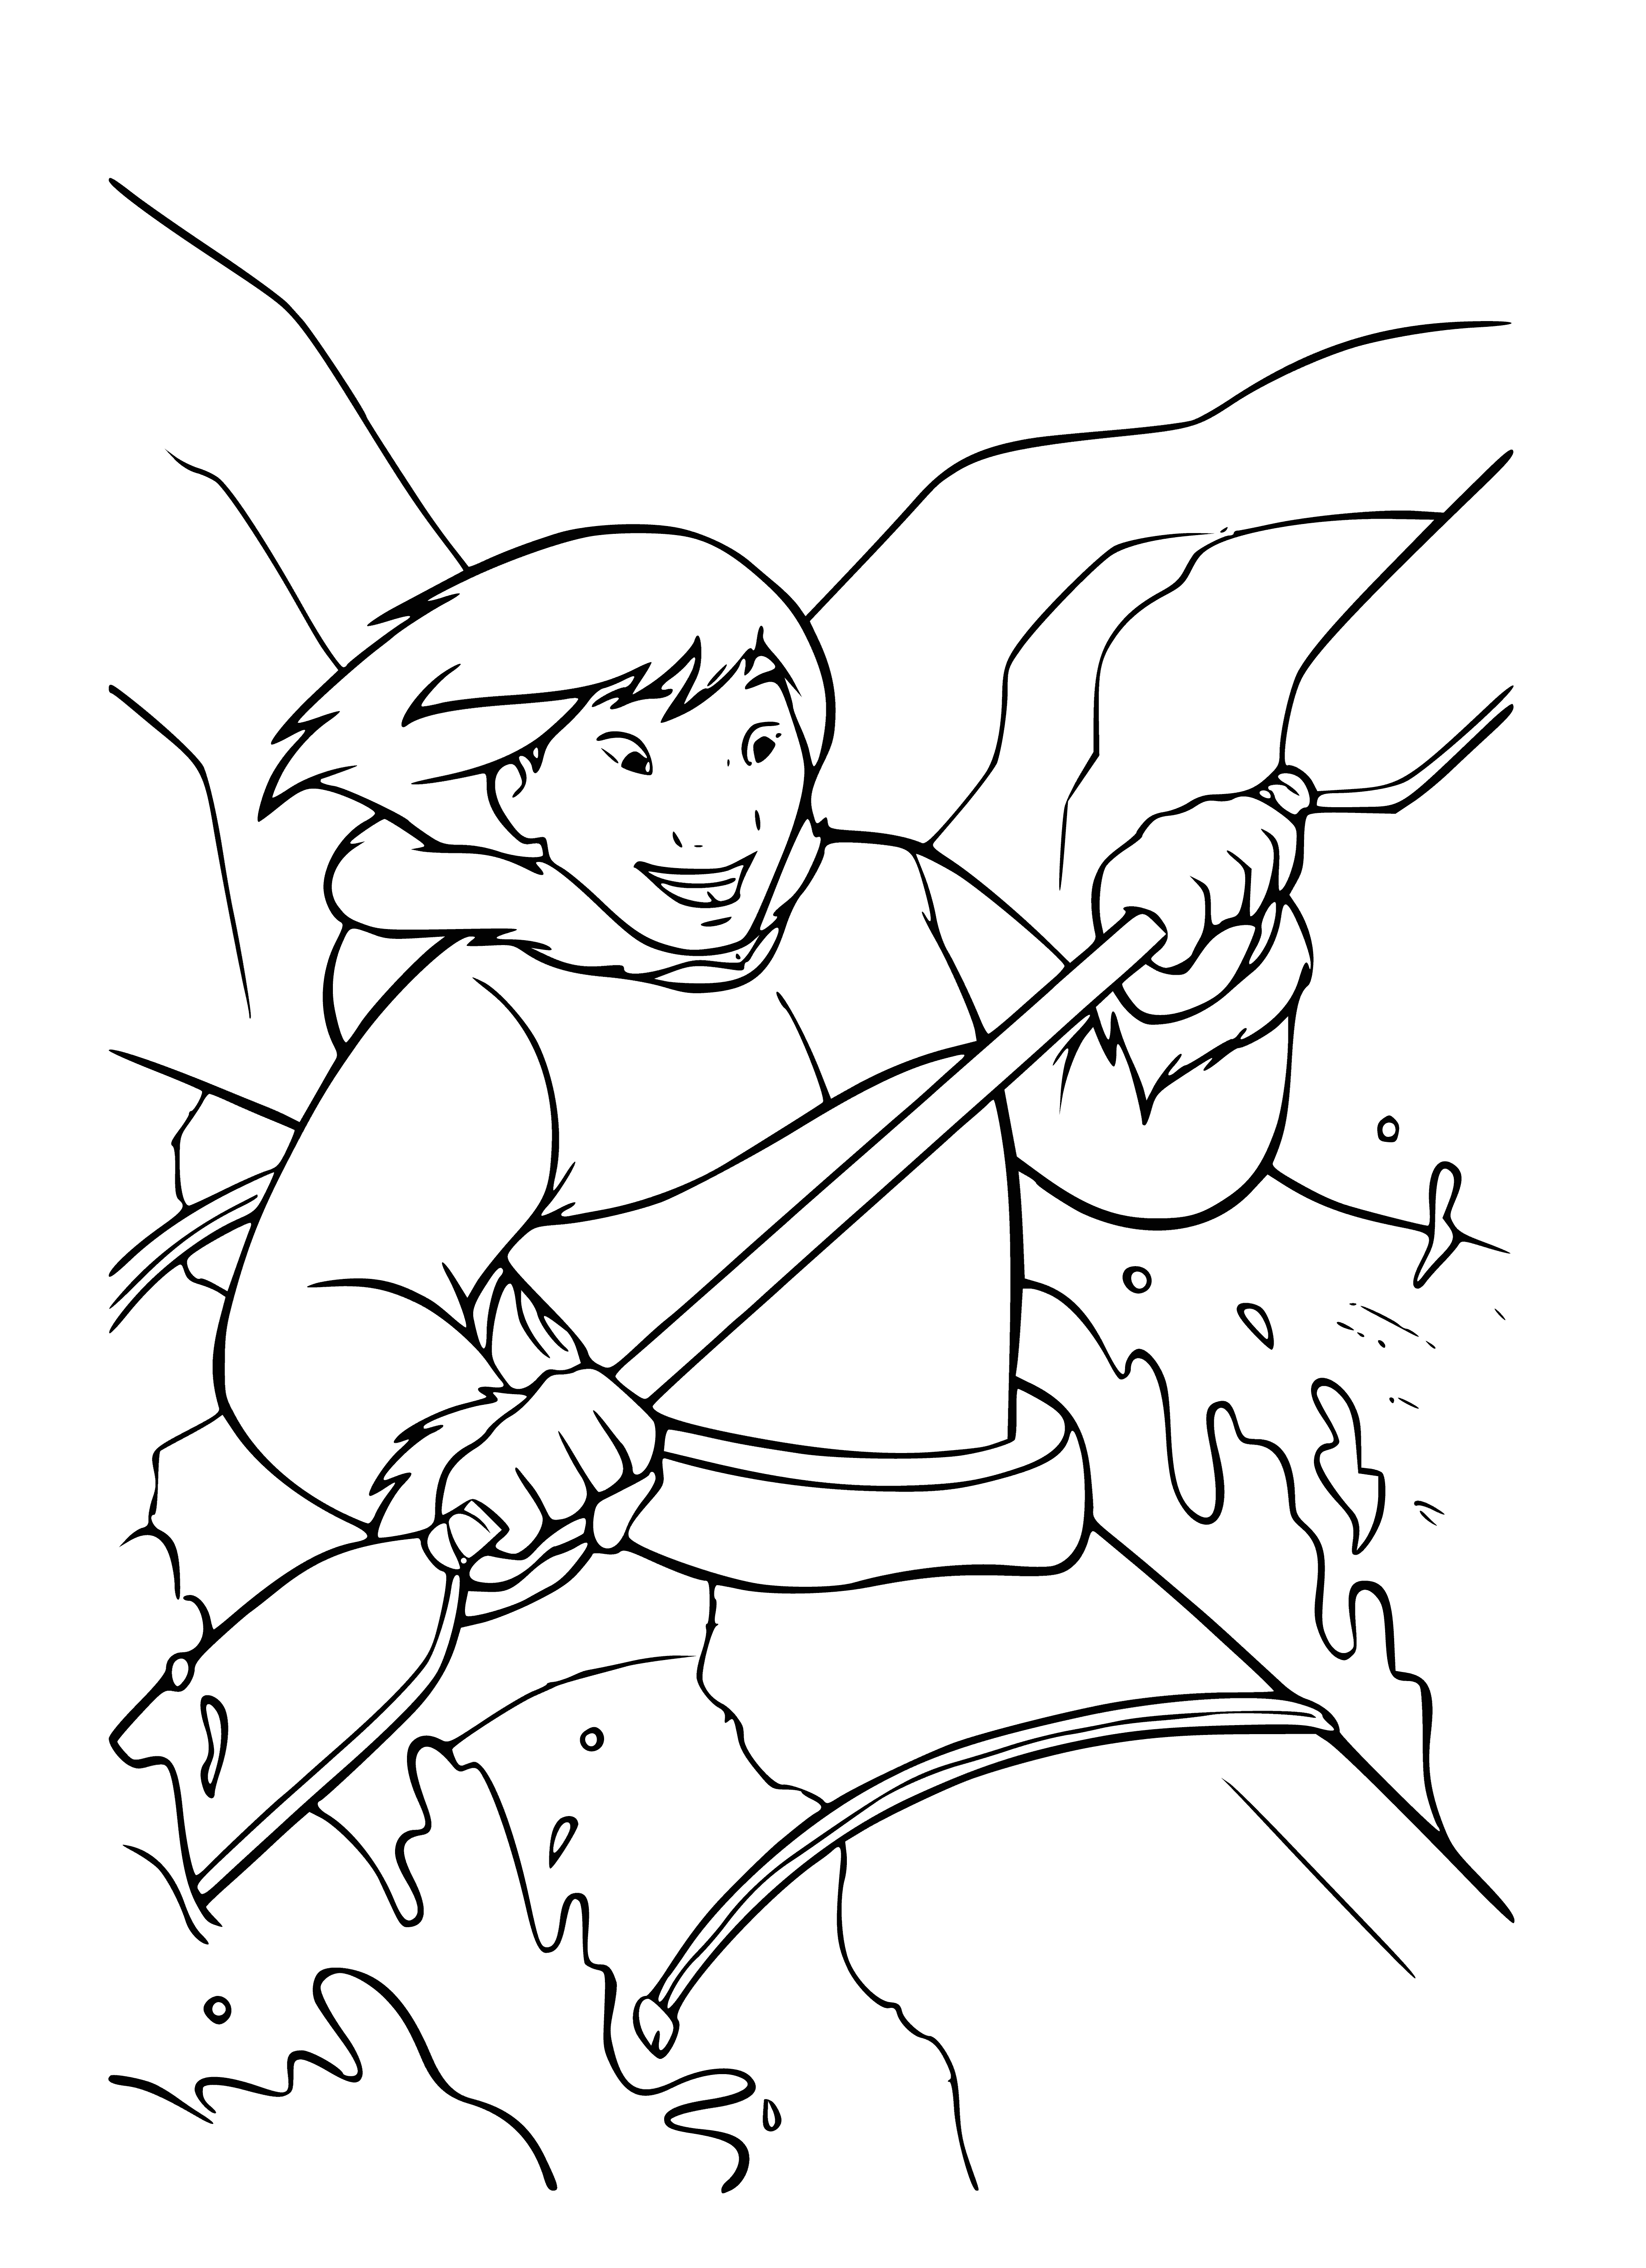 Canoe coloring page